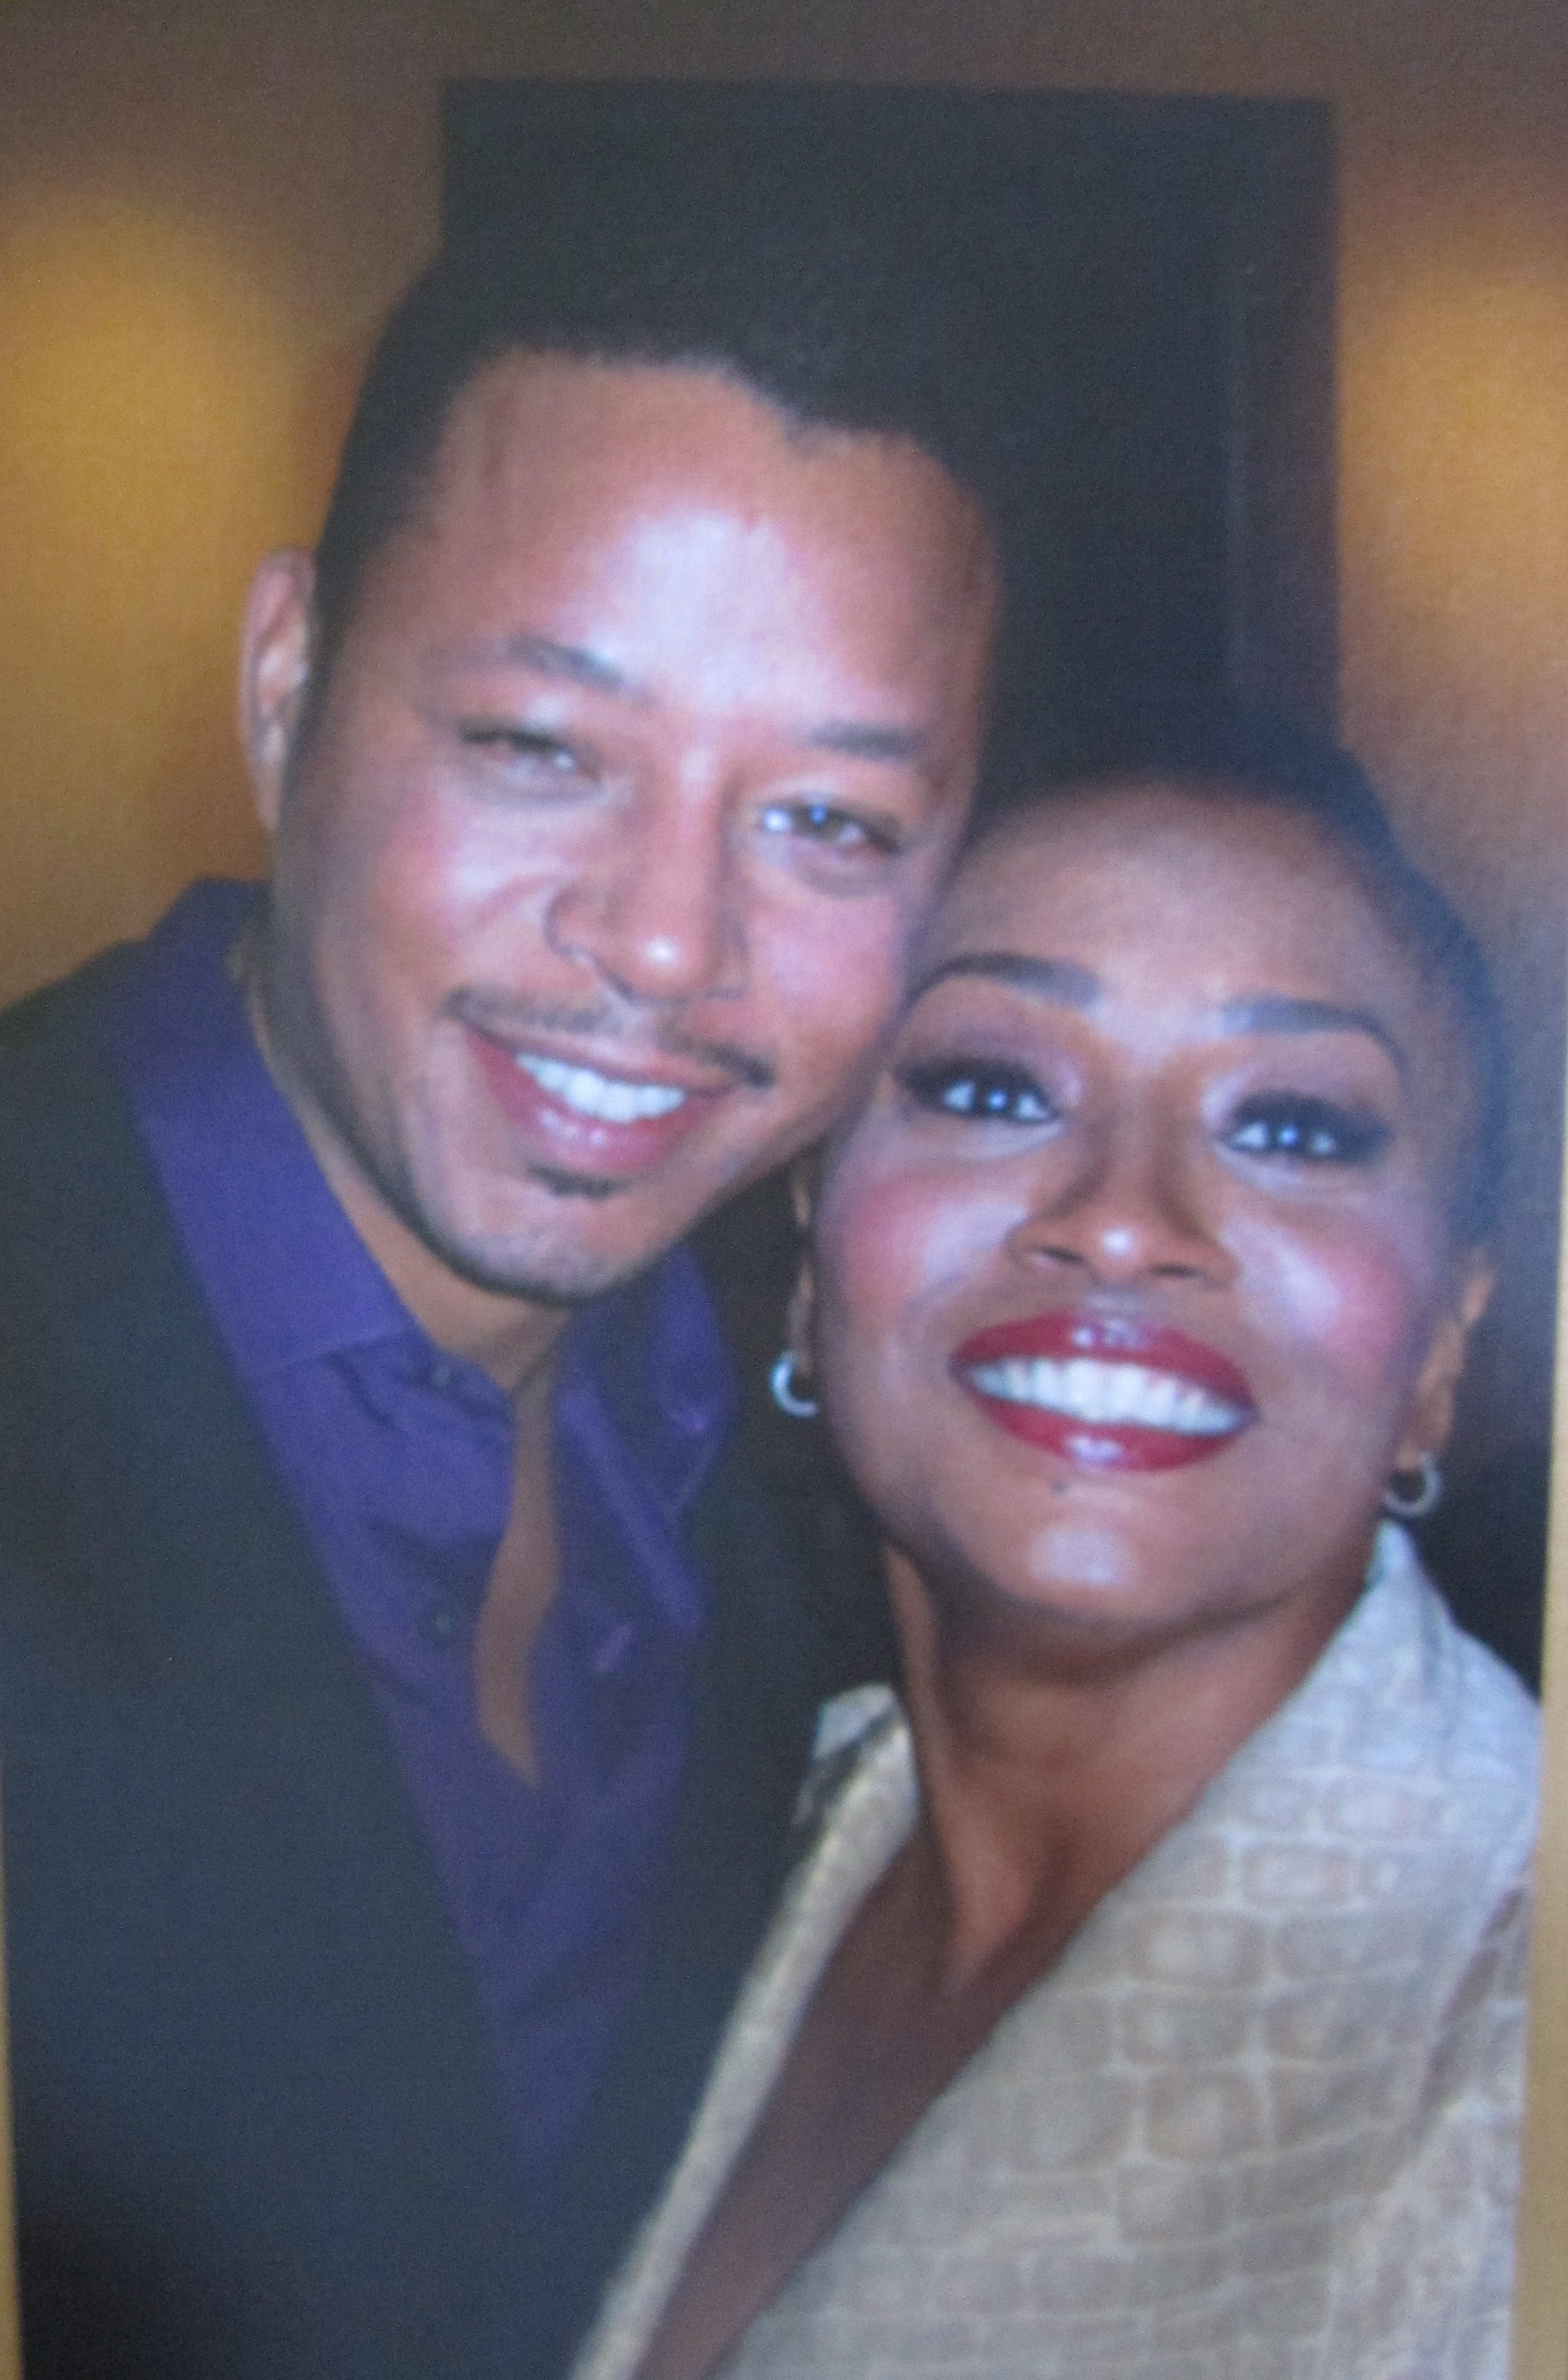 Jenifer Lewis and co-star Terrence Howard at the premiere of their film 